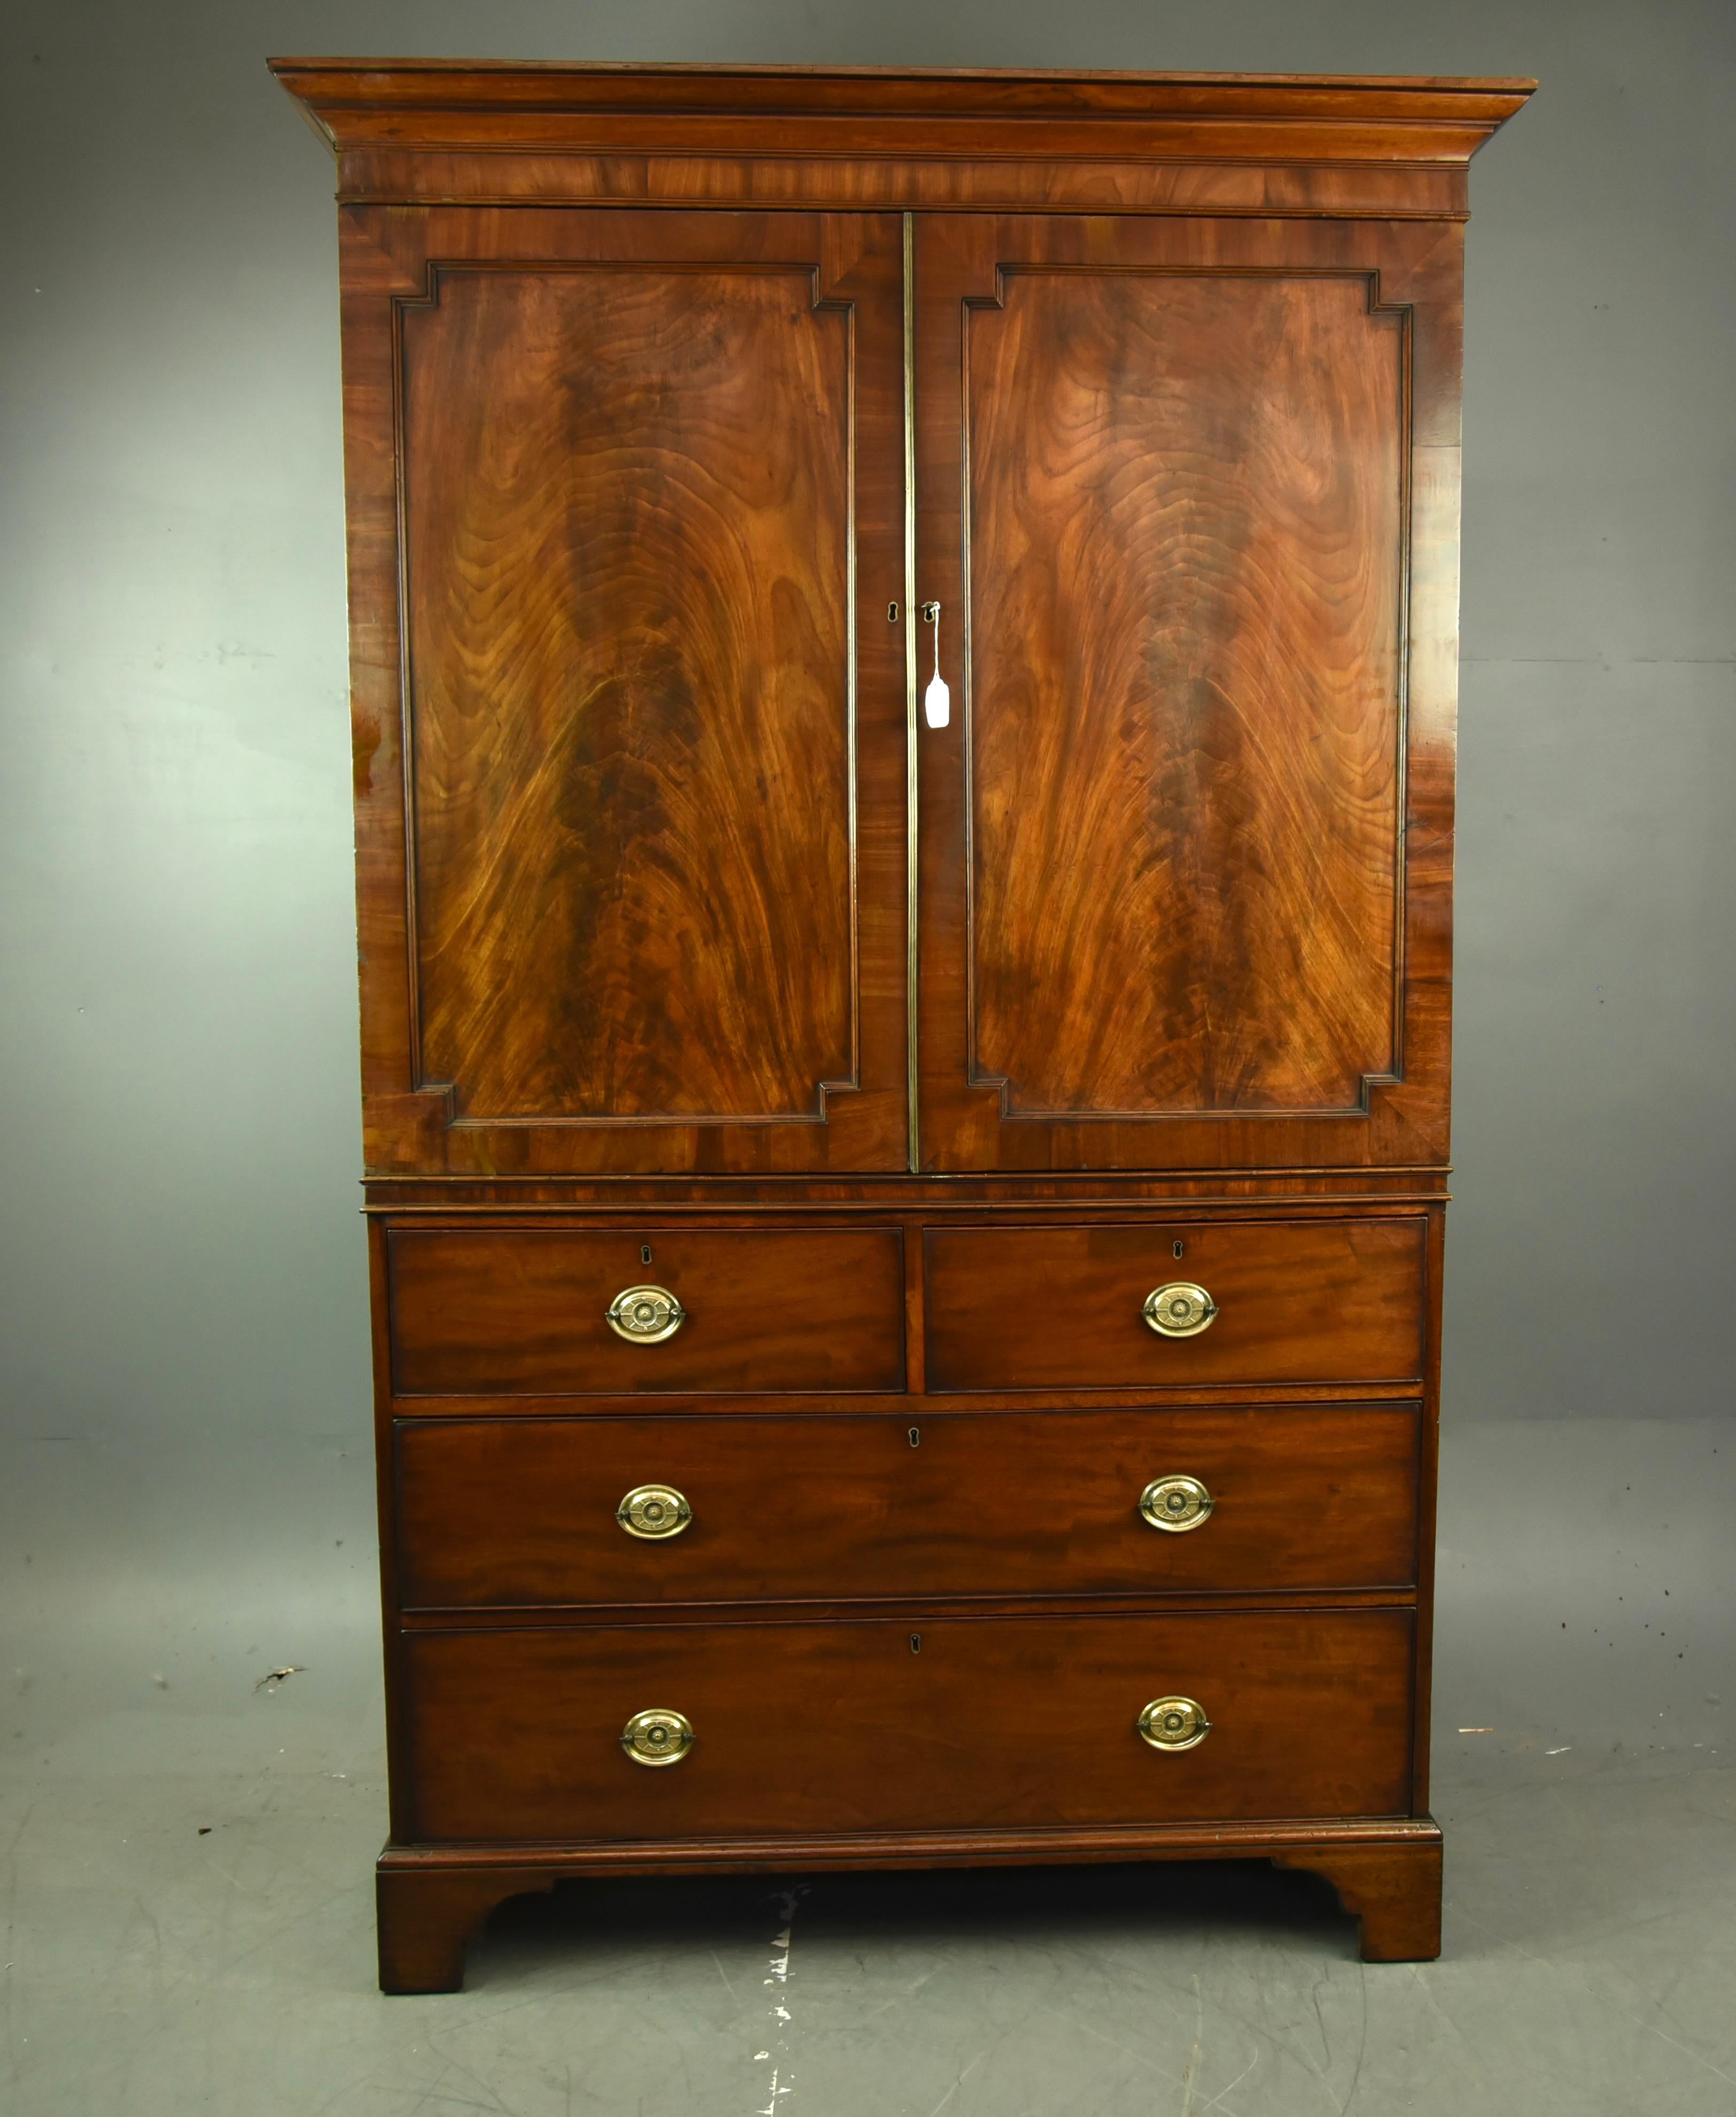 Fine quality Georgian mahogany linen press wardrobe .
The press has two wonderful figured mahogany panel doors with a working lock and key .
The top providing full width hanging with a rail and has ample depth to accommodate modern hangers .
The